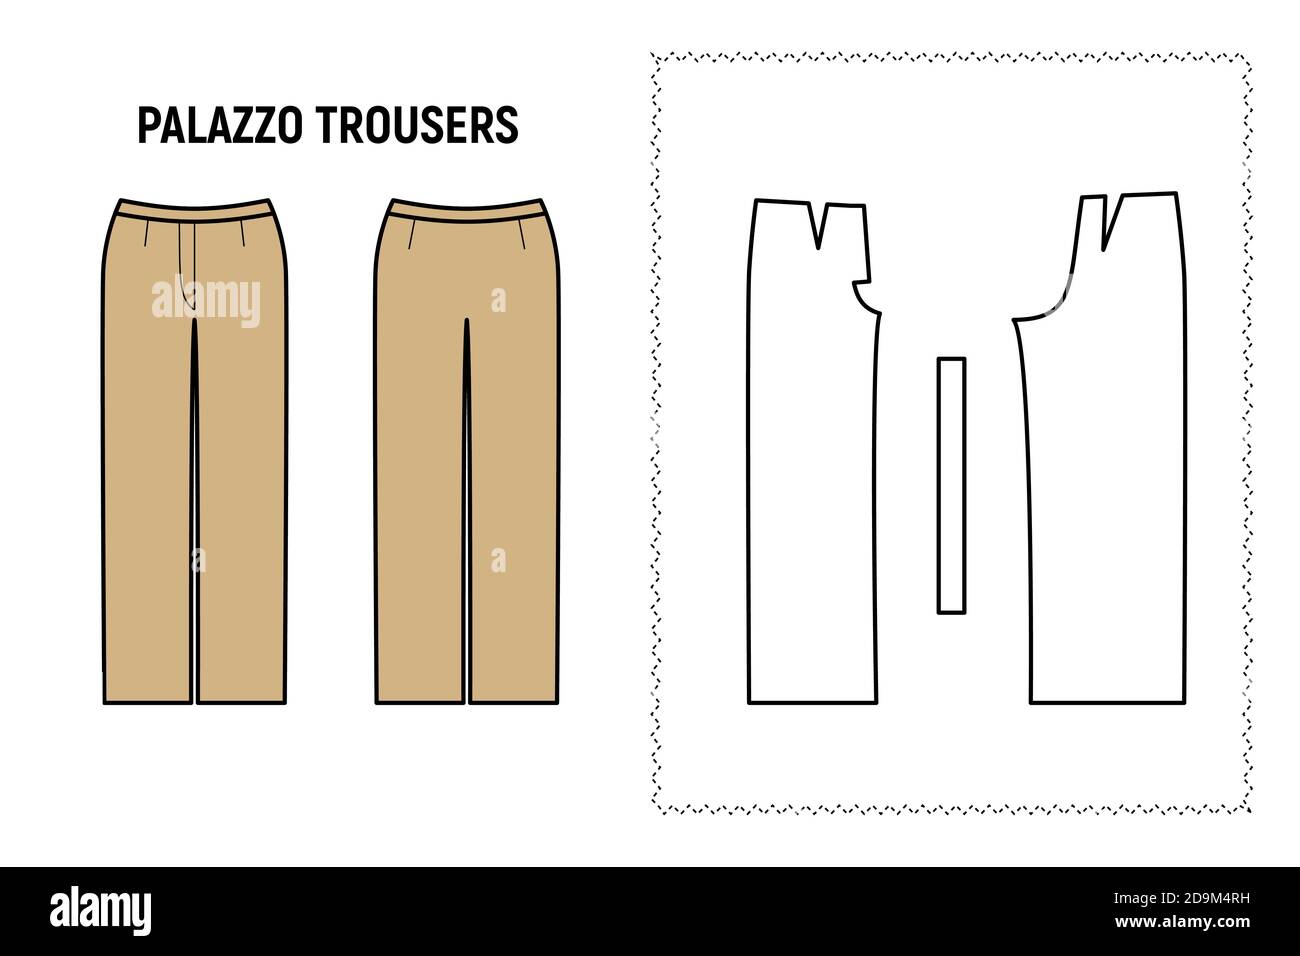 Learn How to Draft the Basic Pants Pattern - The Shapes of Fabric